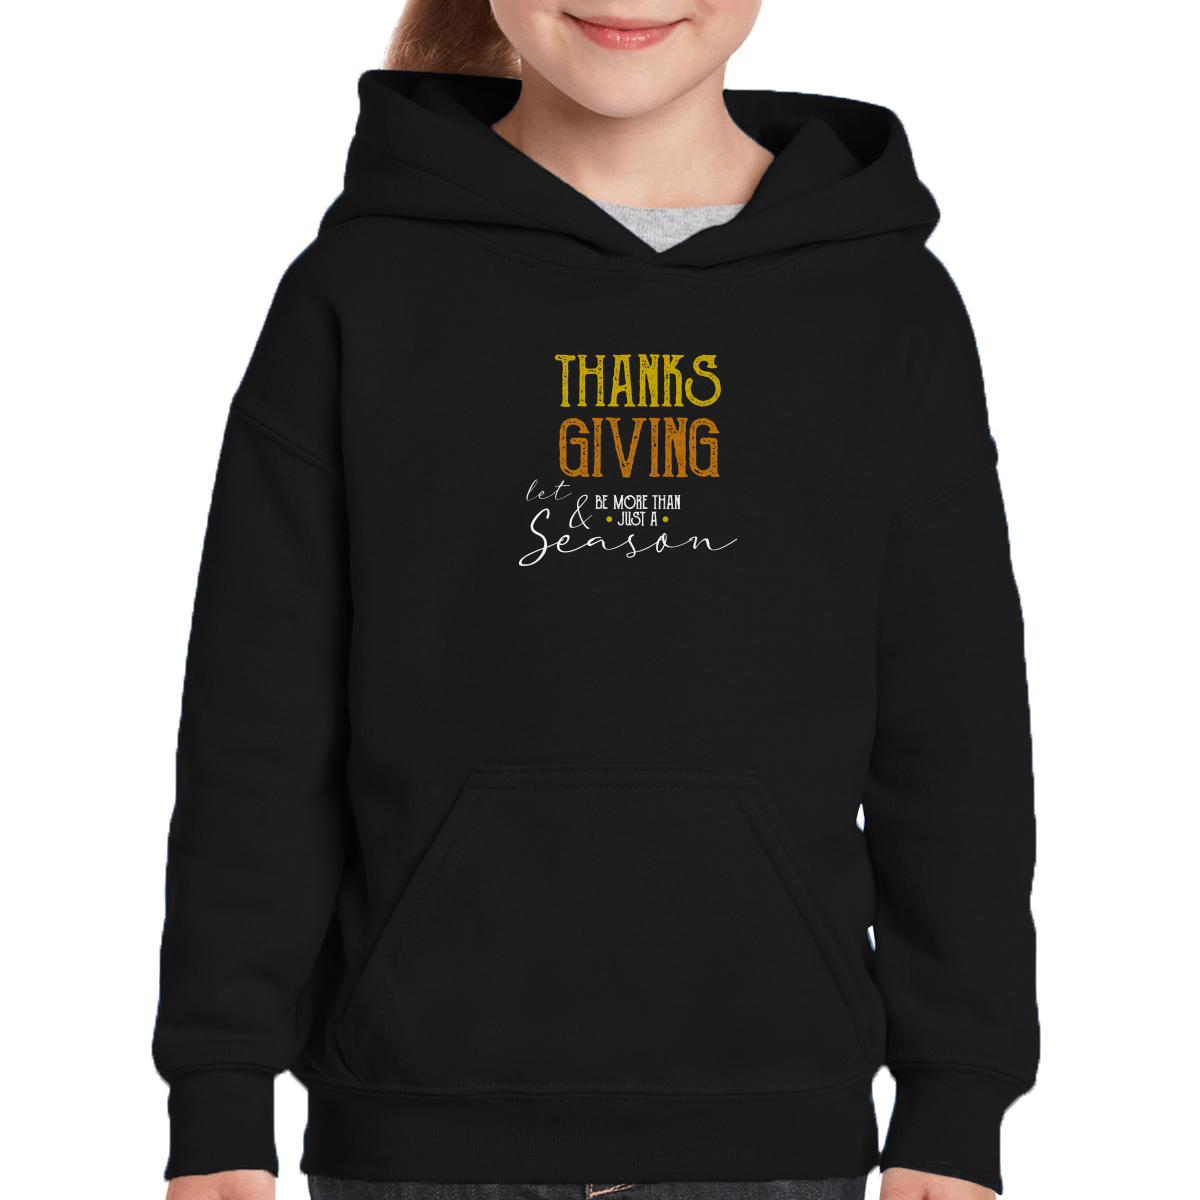 Thanks and Giving  Kids Hoodie | Black